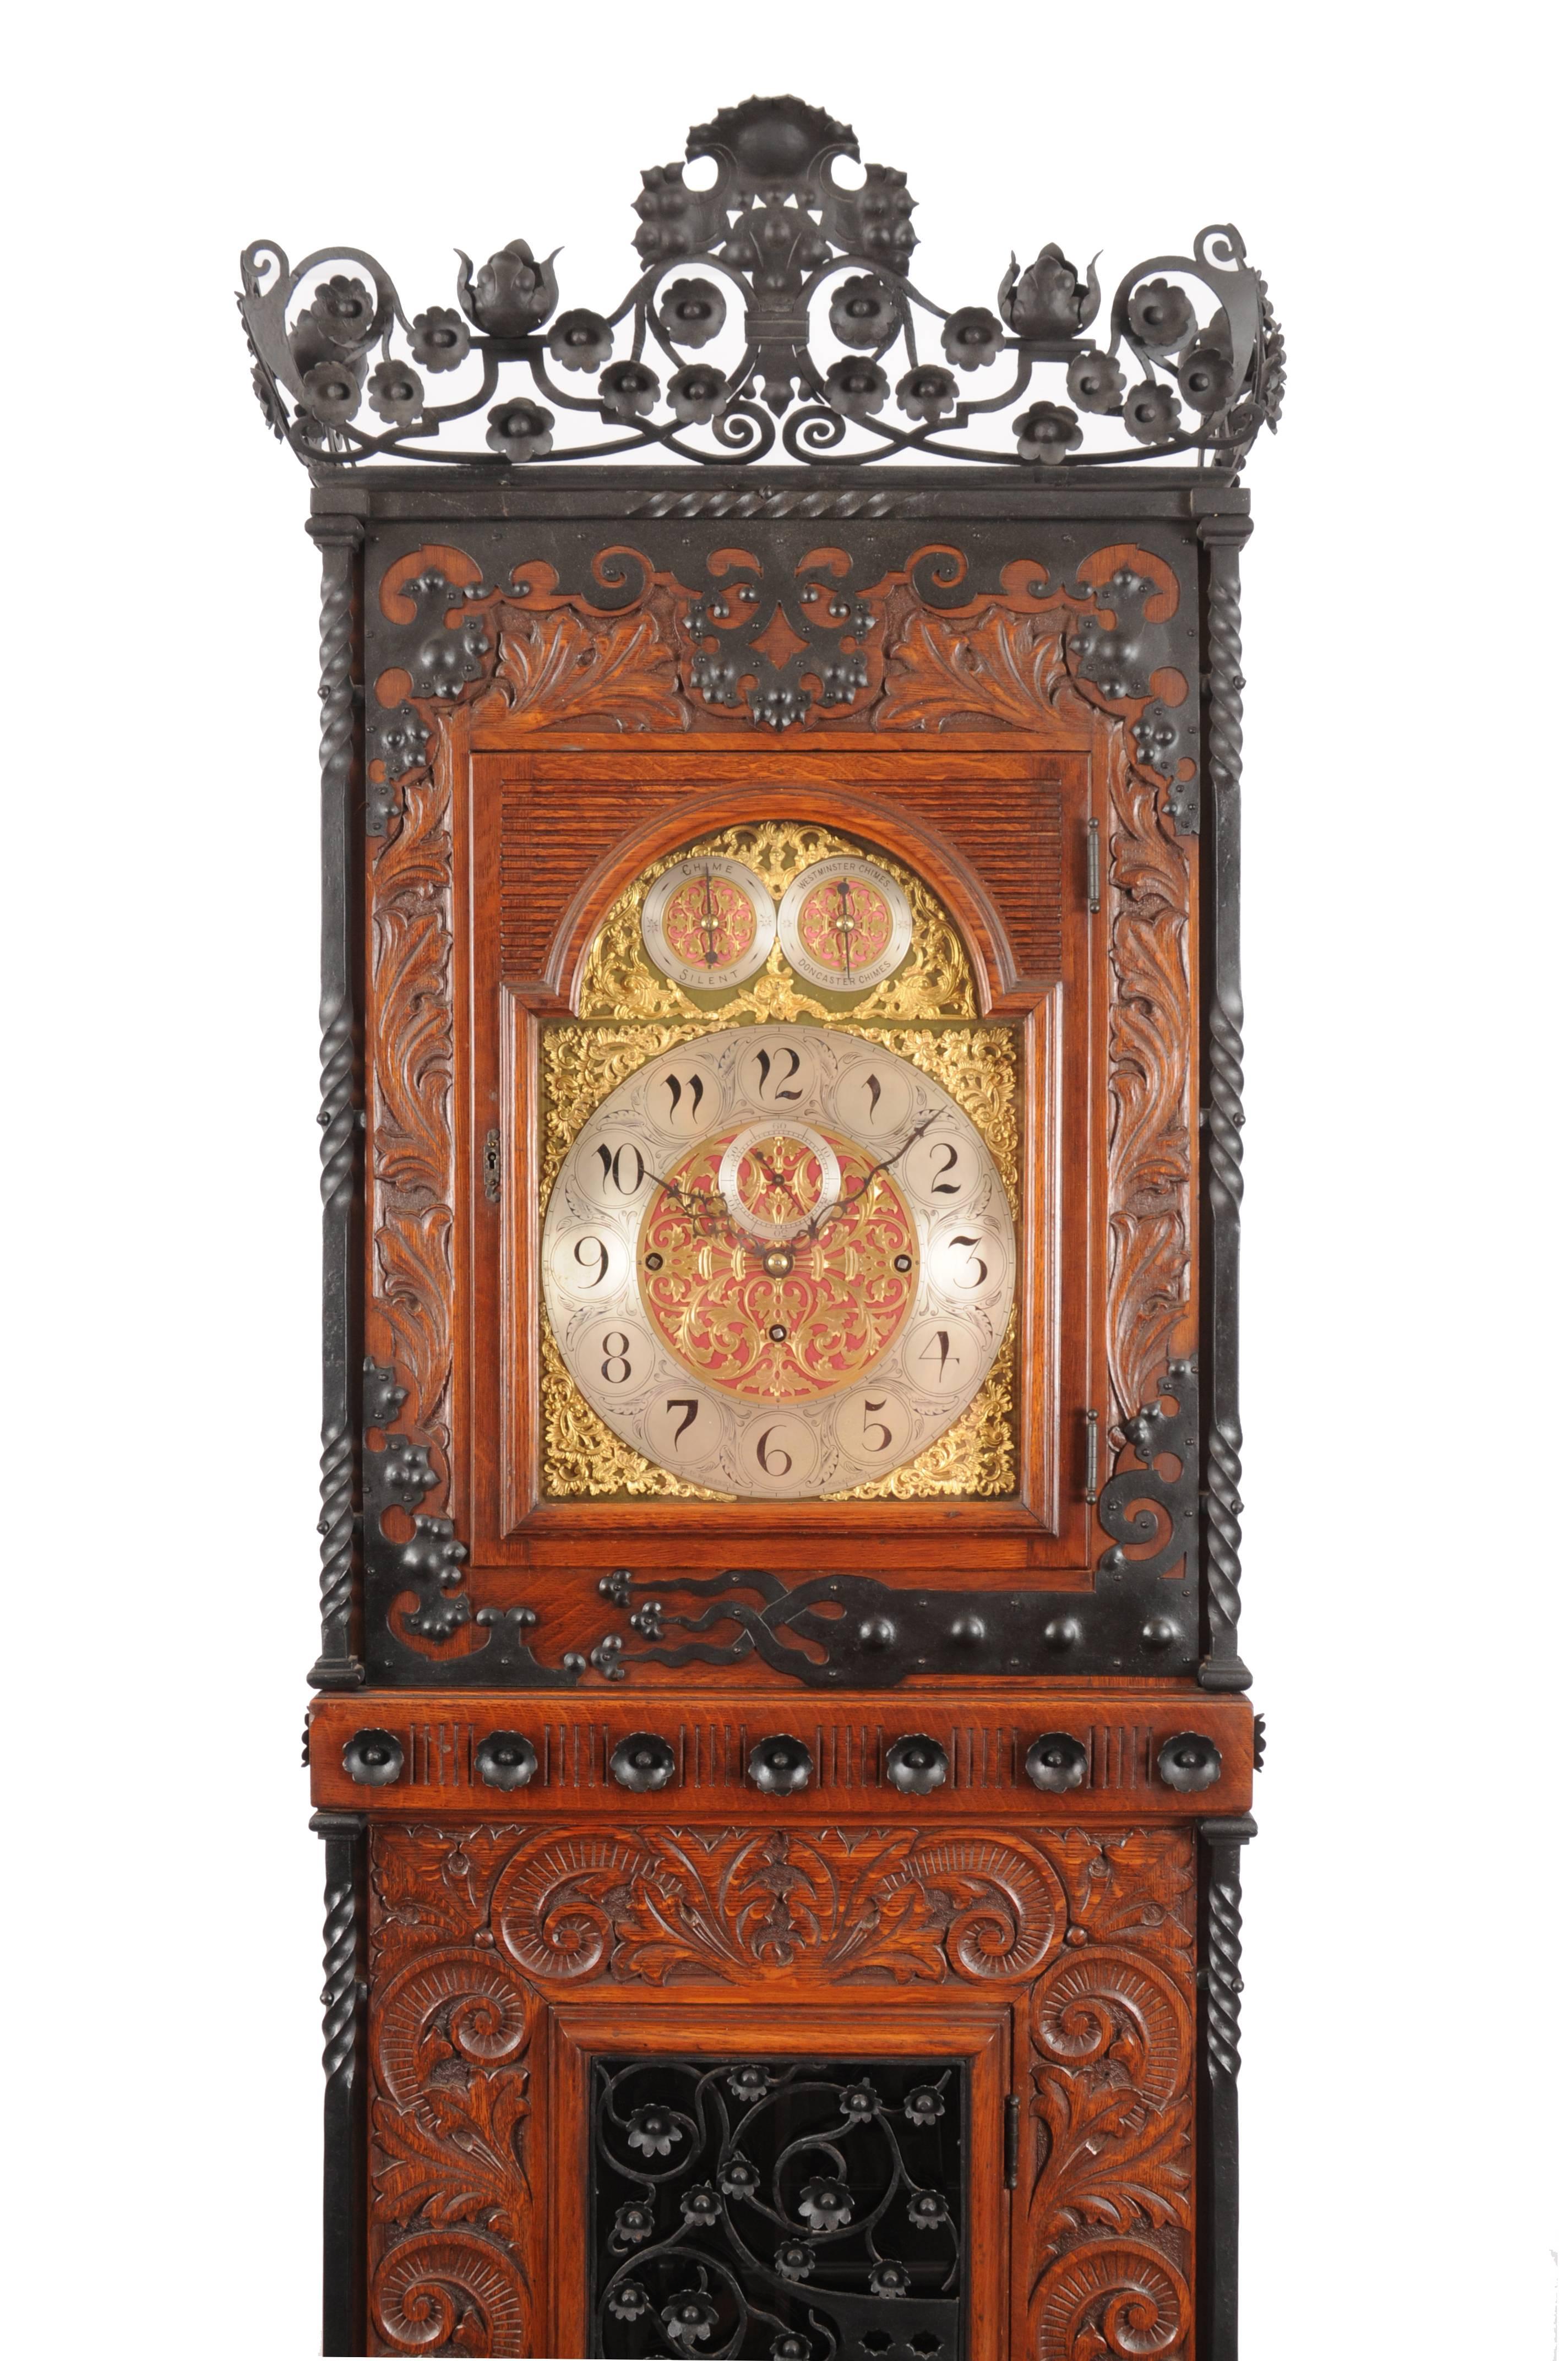 This impressive clock is a rare example of a fully developed early Arts & Crafts or Aesthetic Movement hall clock. The unique nature, large scale and extensive use of handcrafted ornamental embellishment suggest that it was produced as a special